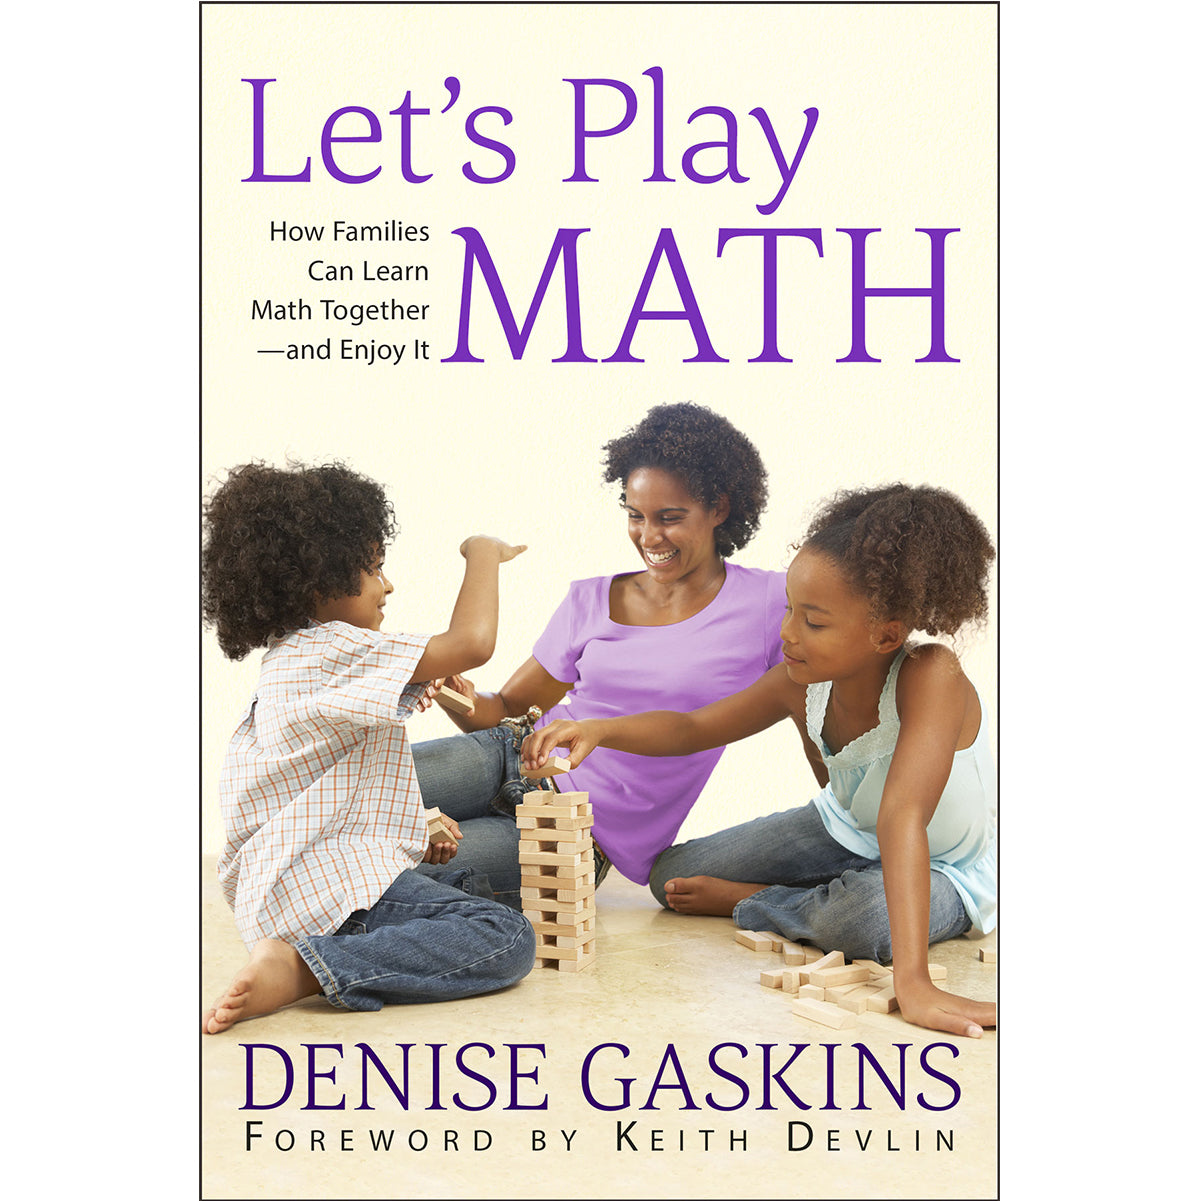 Let's Play Math by Denise Gaskins